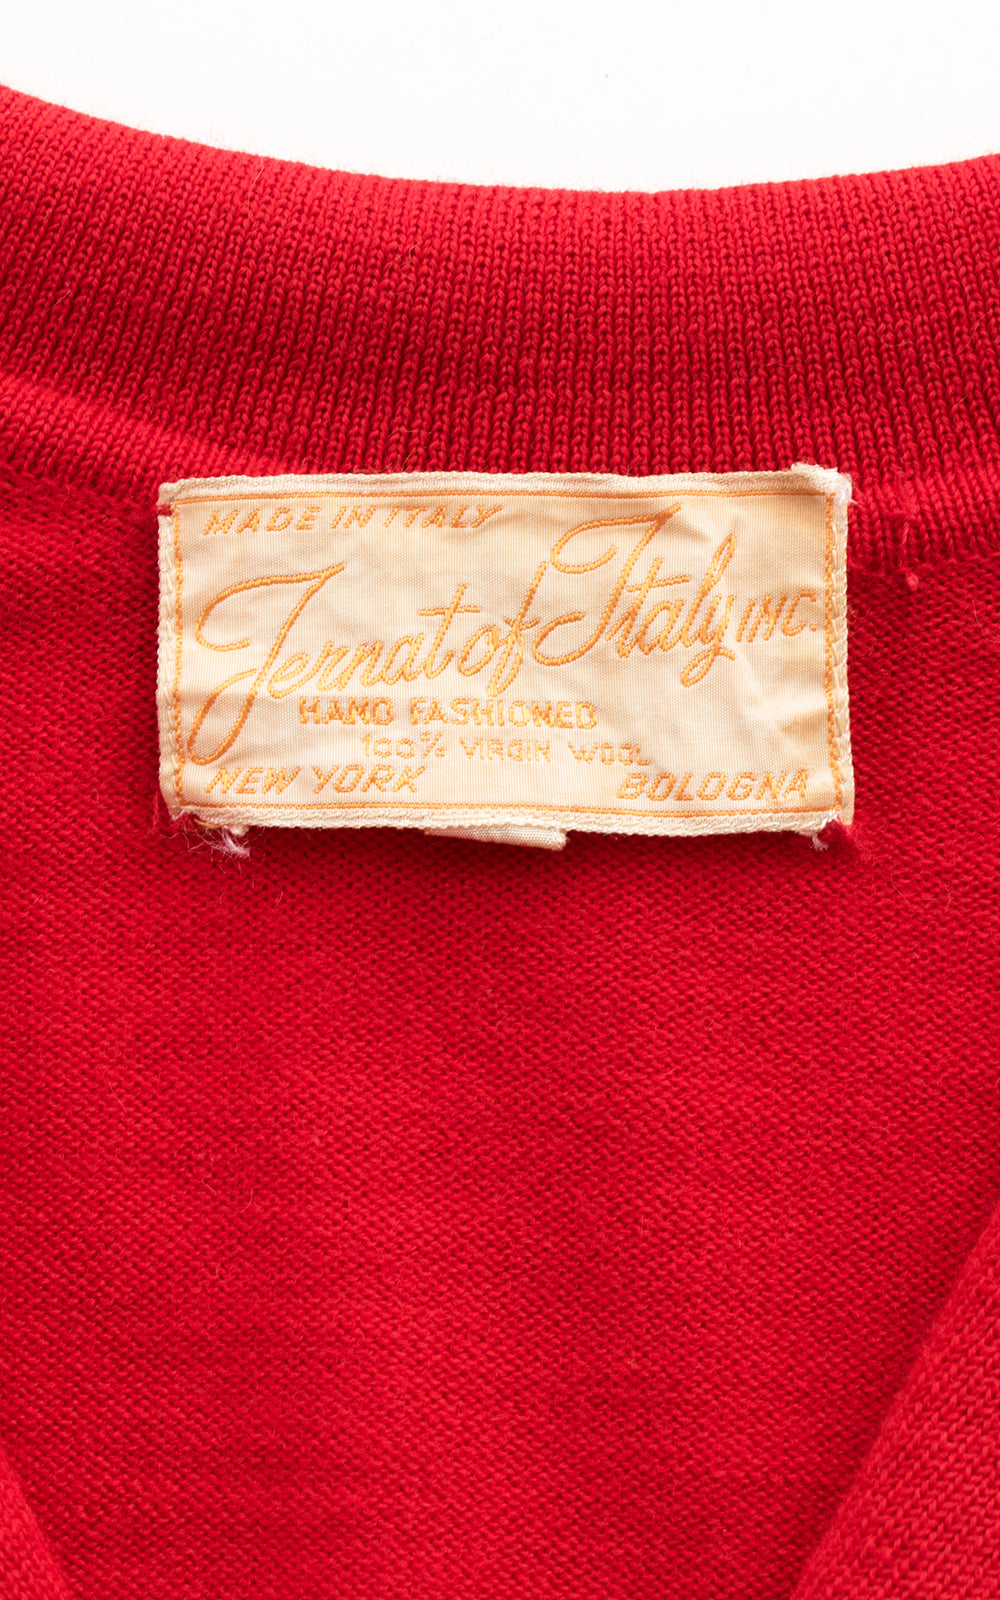 1950s Red Knit Wool Cropped Sweater